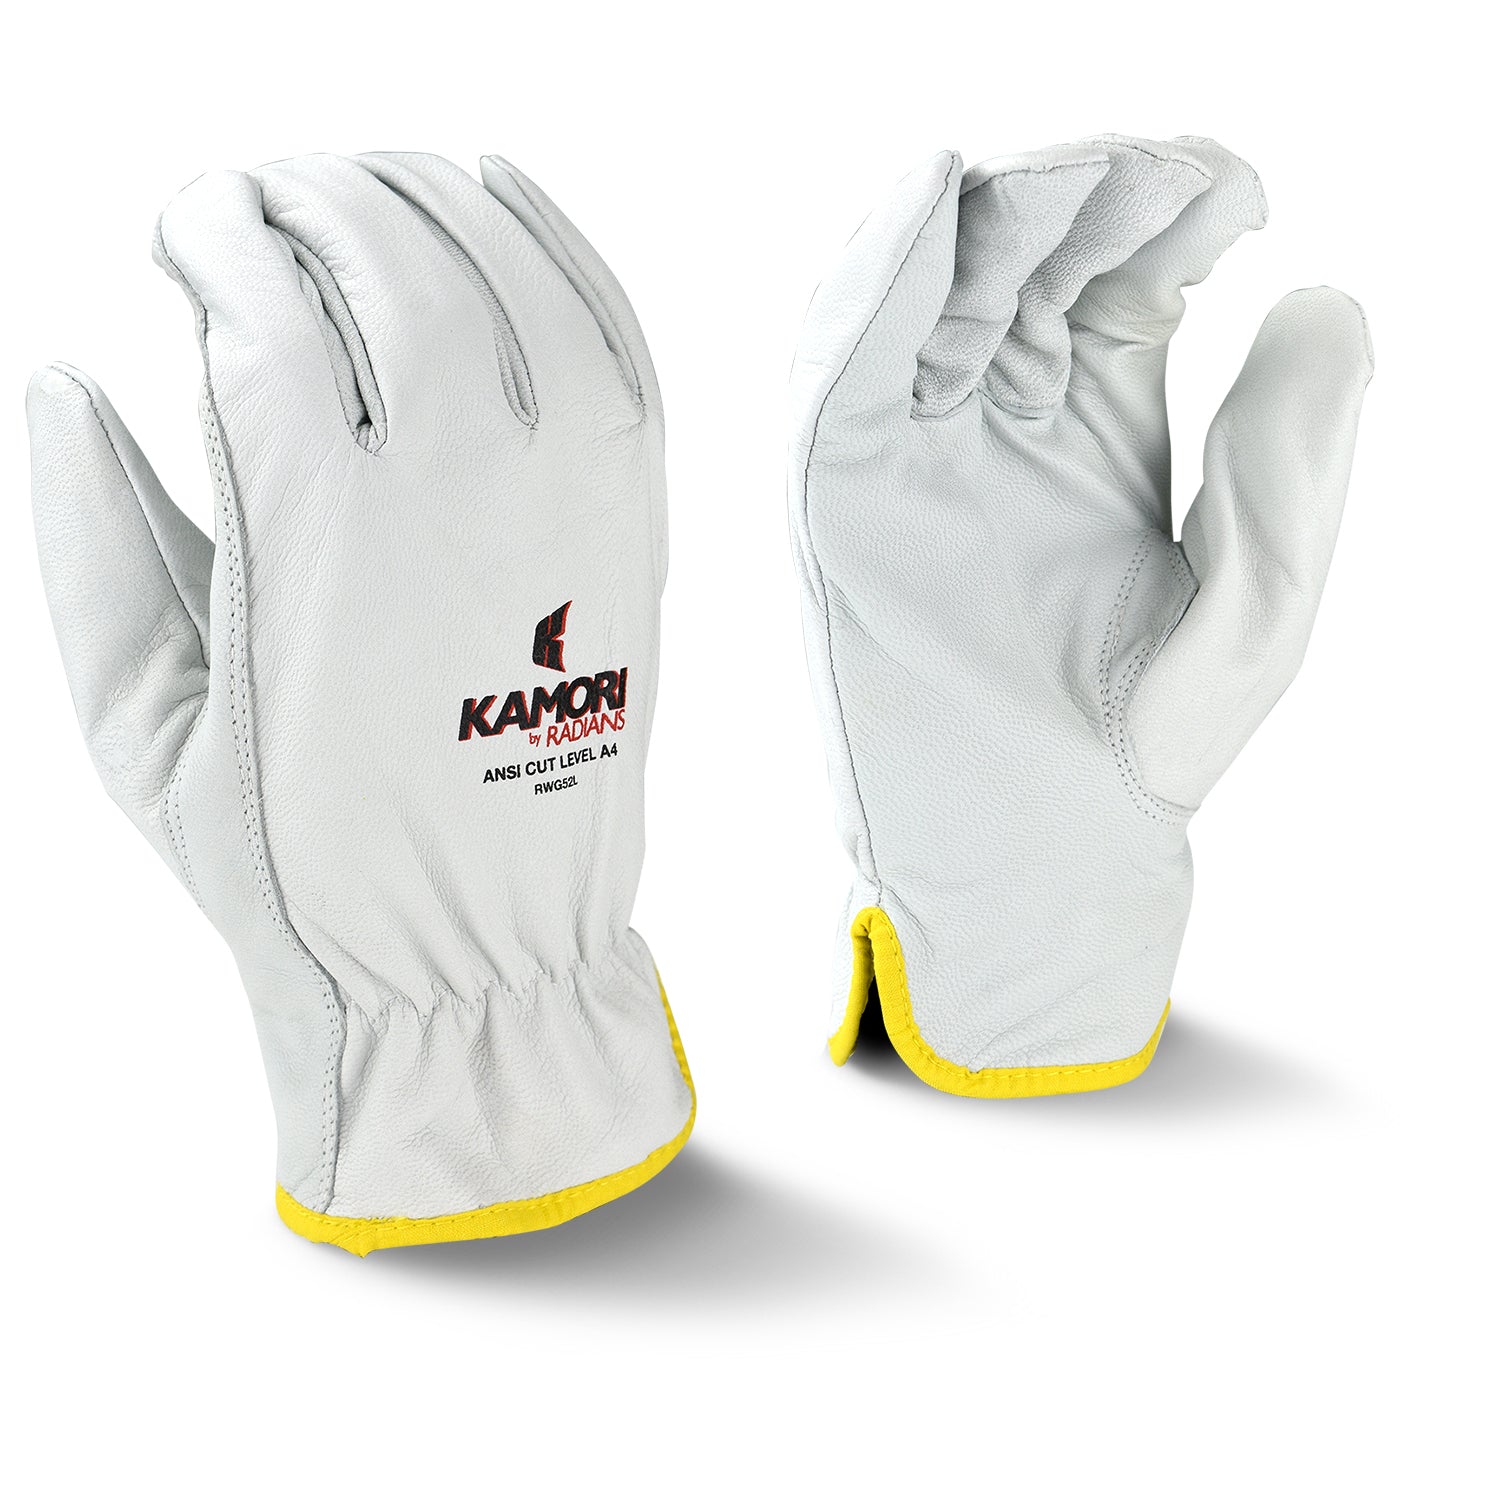 Radians RWG52 KAMORI®Cut Protection Level A4 Work Glove-eSafety Supplies, Inc